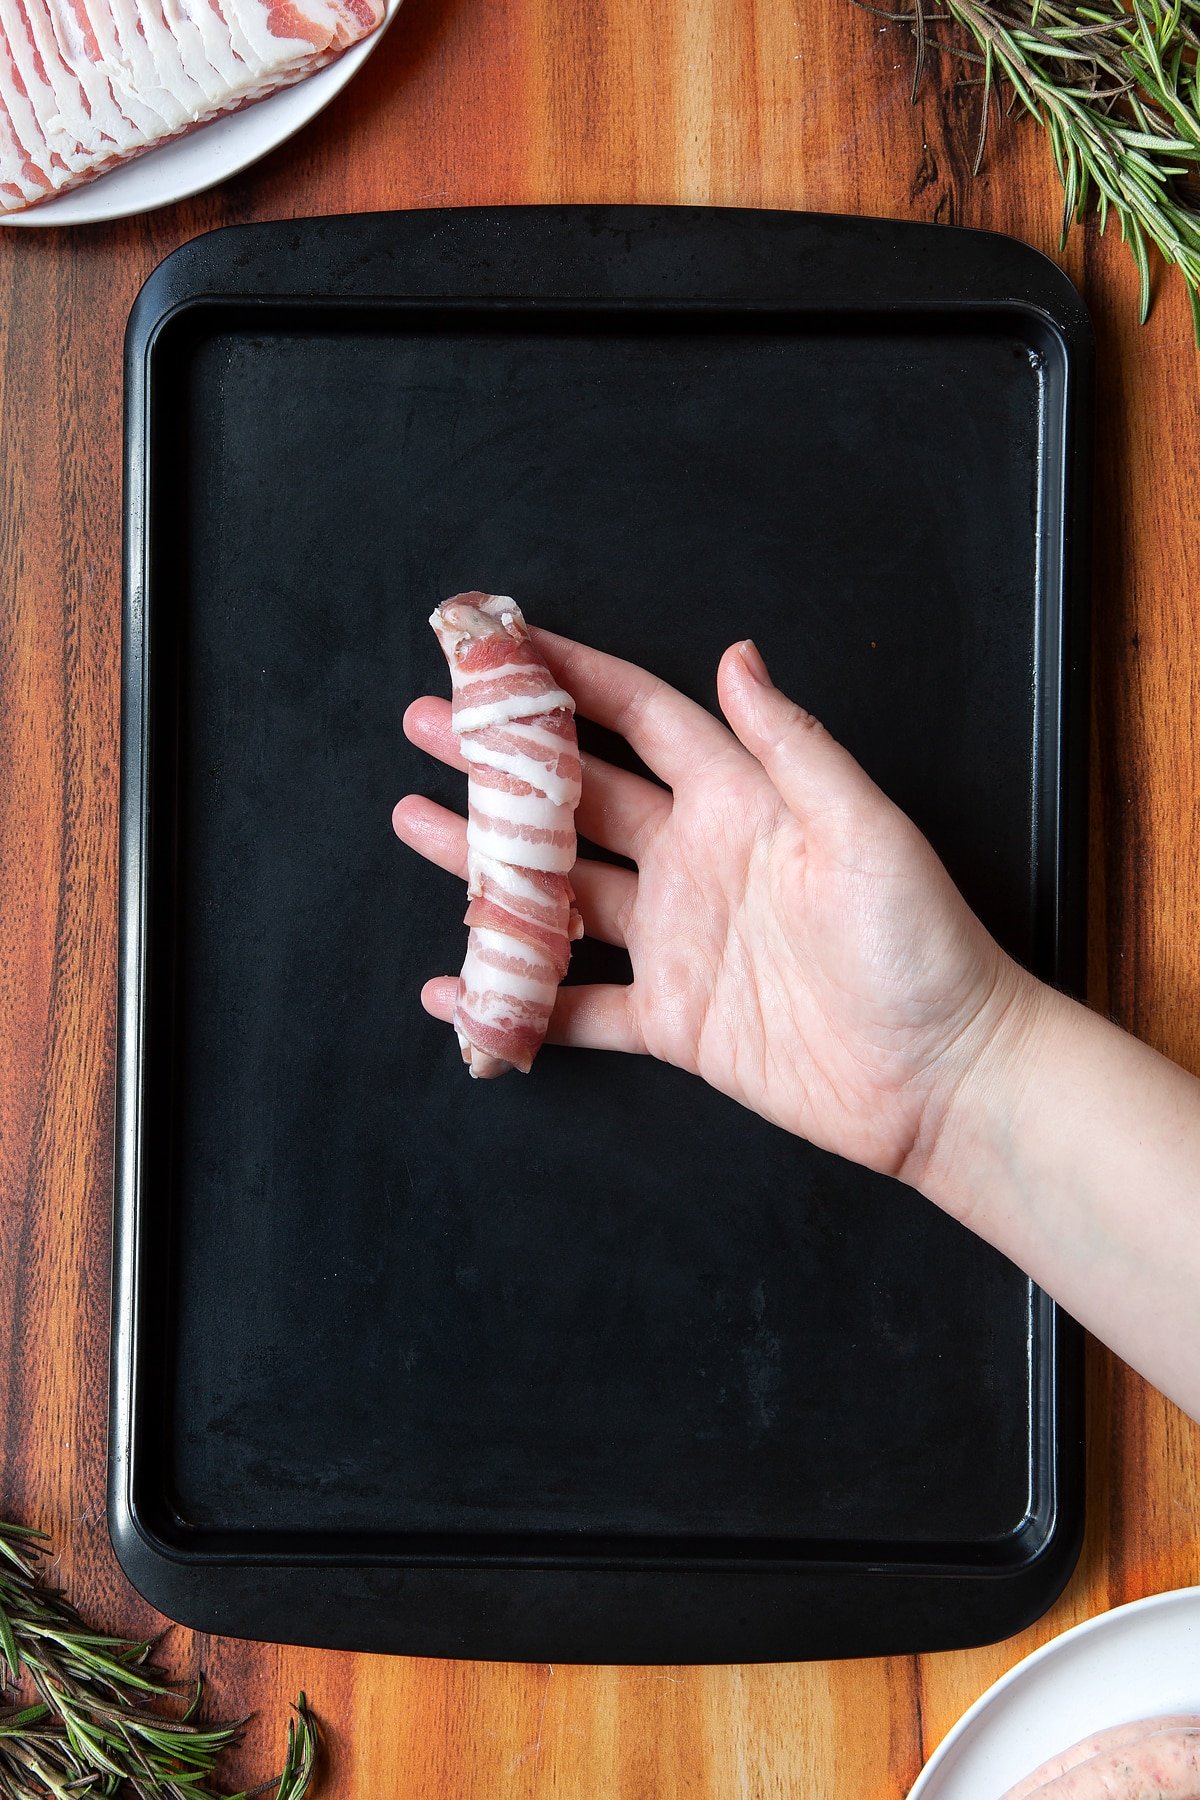 Overhead shot of a hand holding bacon-wrapped sausage above black tray